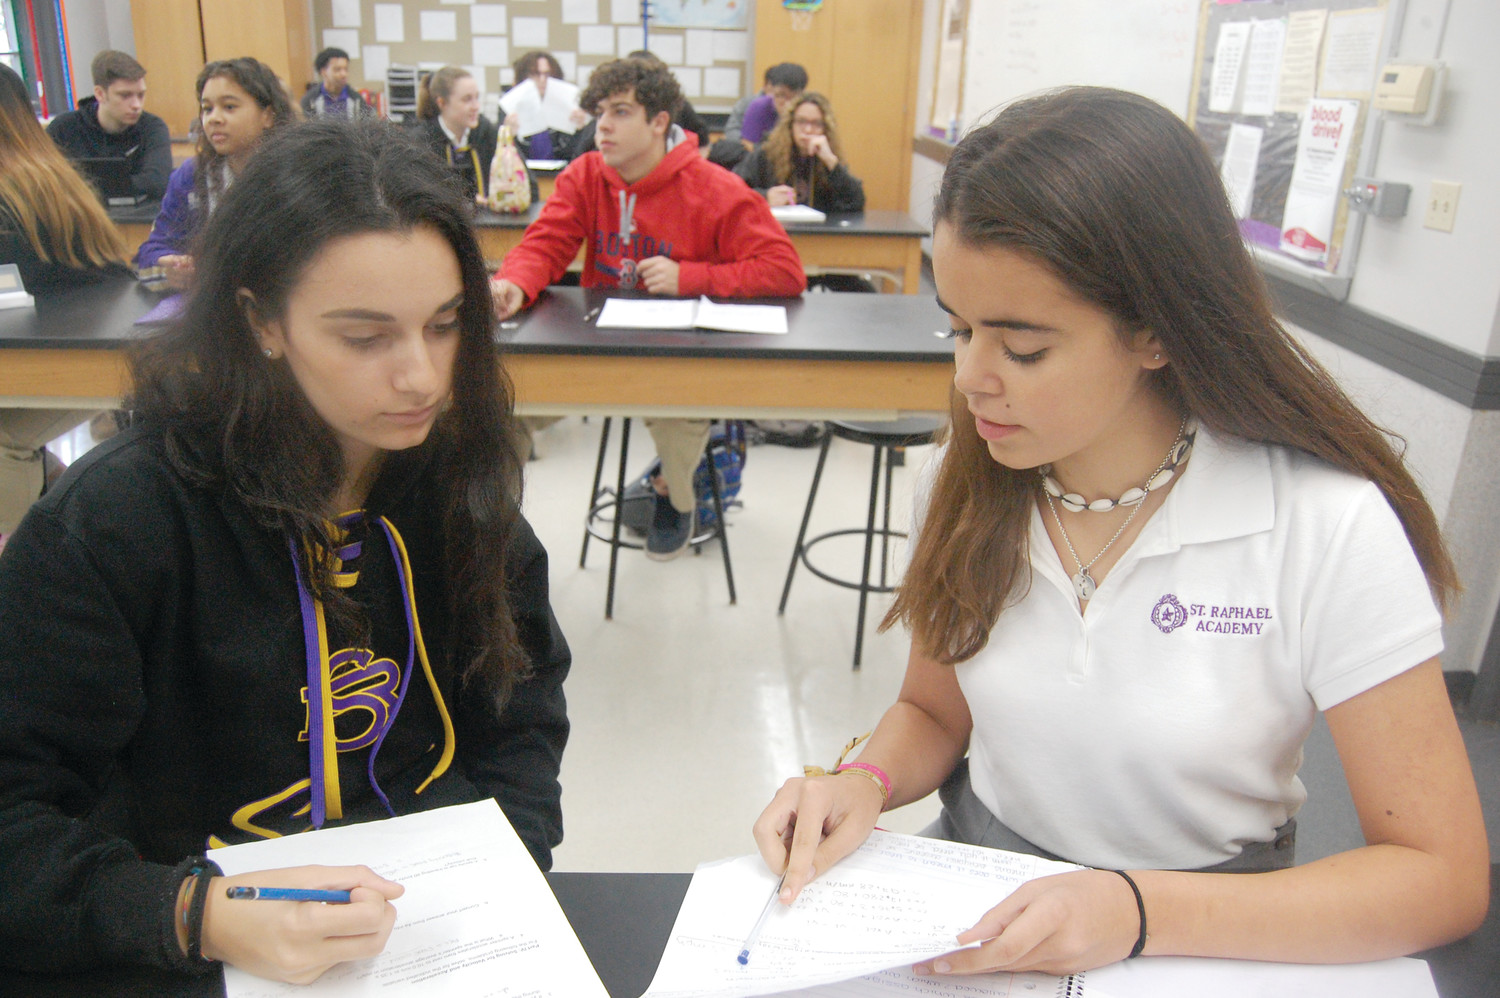 Silvia Sternaiuolo, 16, of Italy, left, and Teresa Rebelo, 15, of Portugal in a physics class at St. Raphael Academy. A new program that began this year allows high school-aged girls from around the world to stay at Overbrook Academy and attend classes by day at St. Raphael Academy.